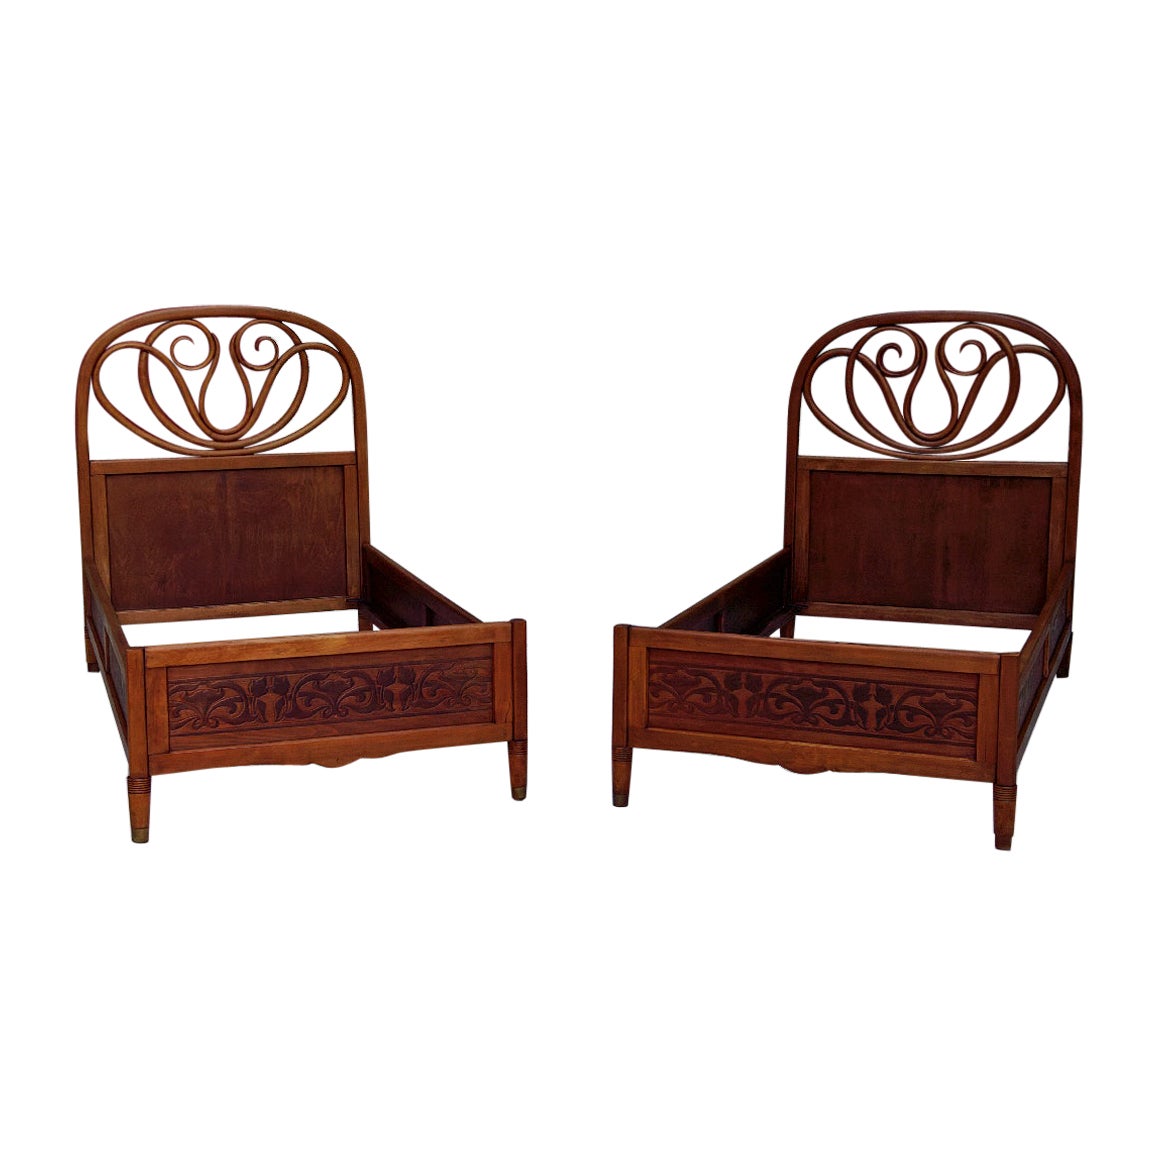 Pair of Bentwood Beds by Thonet, circa 1900 For Sale